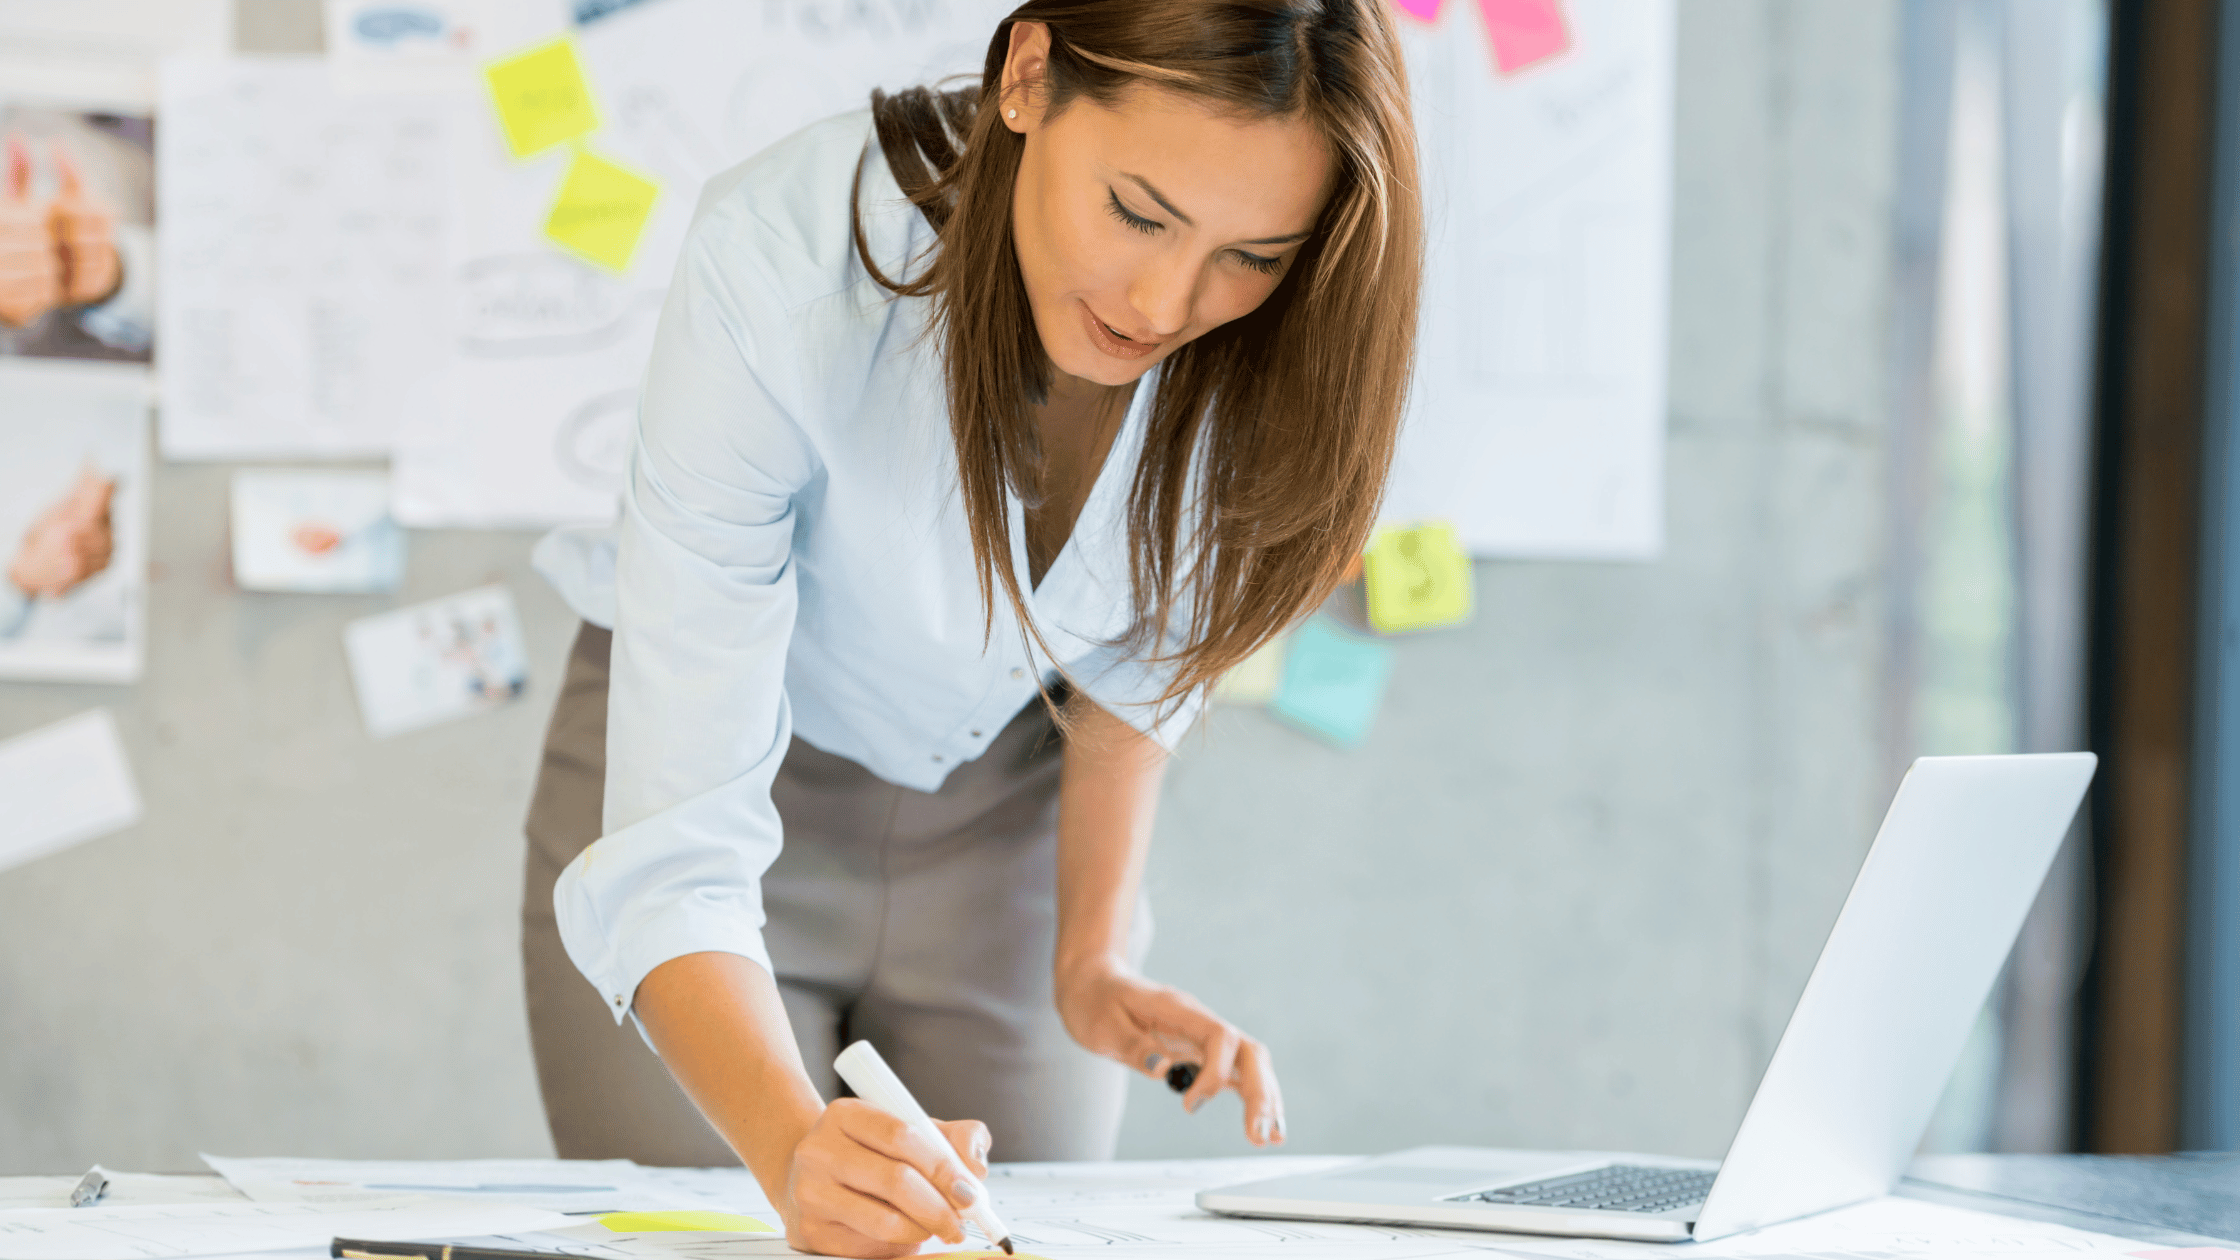 Different Types of Business Structures to Consider For a New Business | Woman business planning